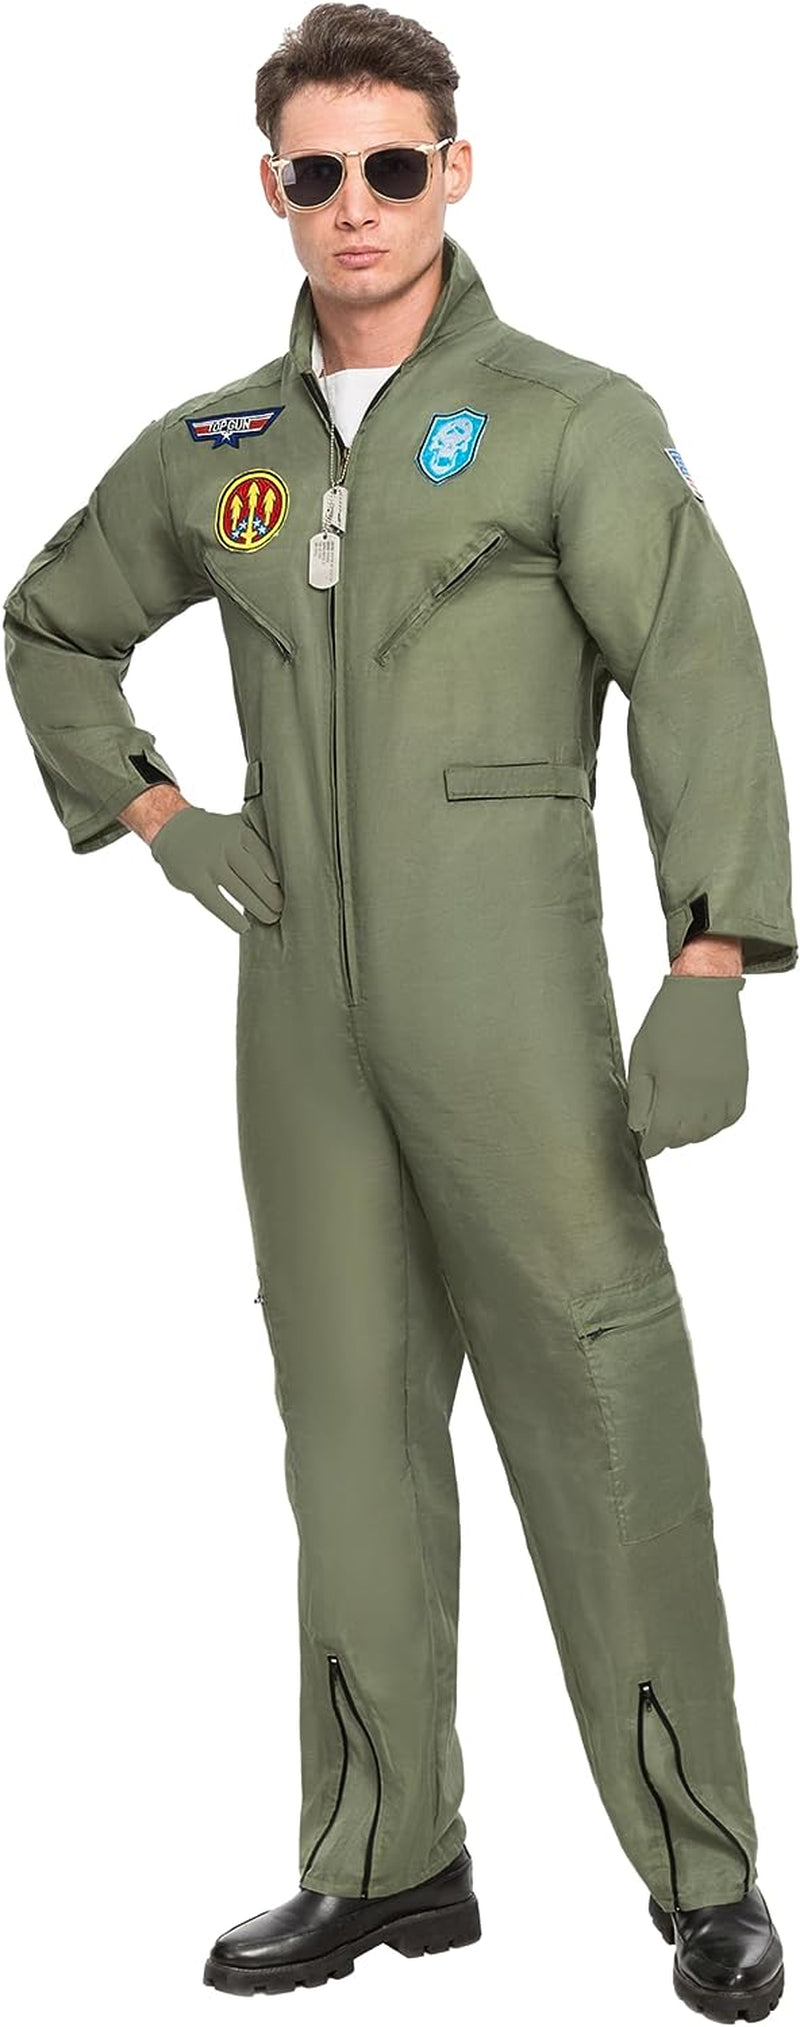 Spooktacular Creations Men’S Flight Pilot Adult Costume with Accessory for Halloween Party  Spooktacular Creations   